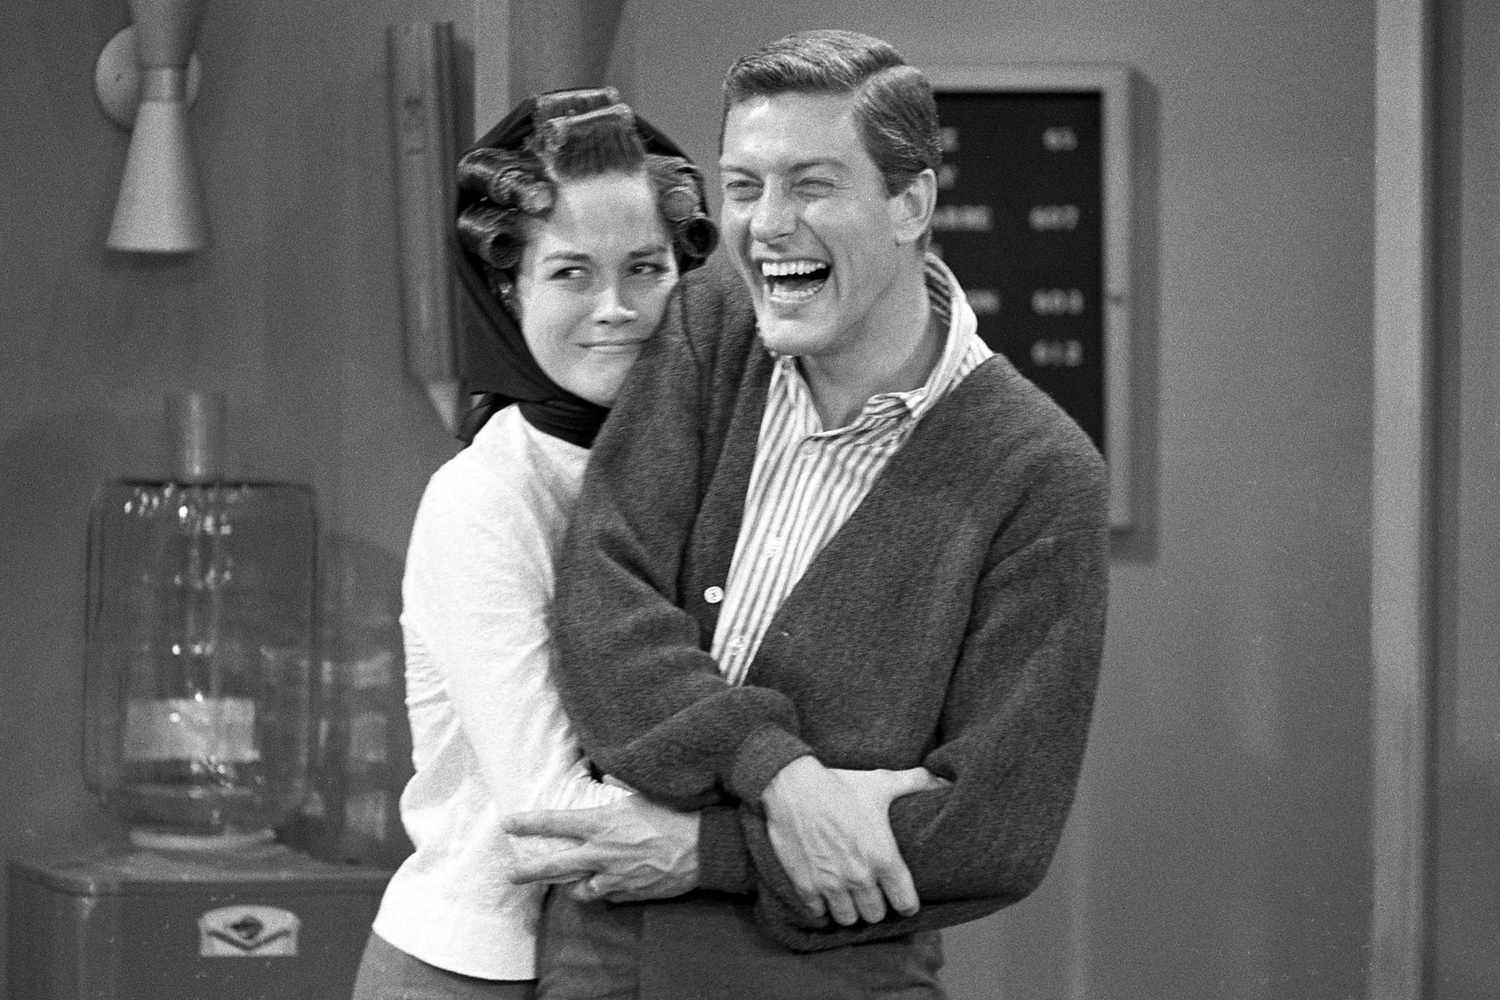 Mary Tyler Moore With&nbsp;Dick Van Dyke in Rehearsals for&nbsp;The Dick Van Dyke Show&nbsp;on December 2, 1963